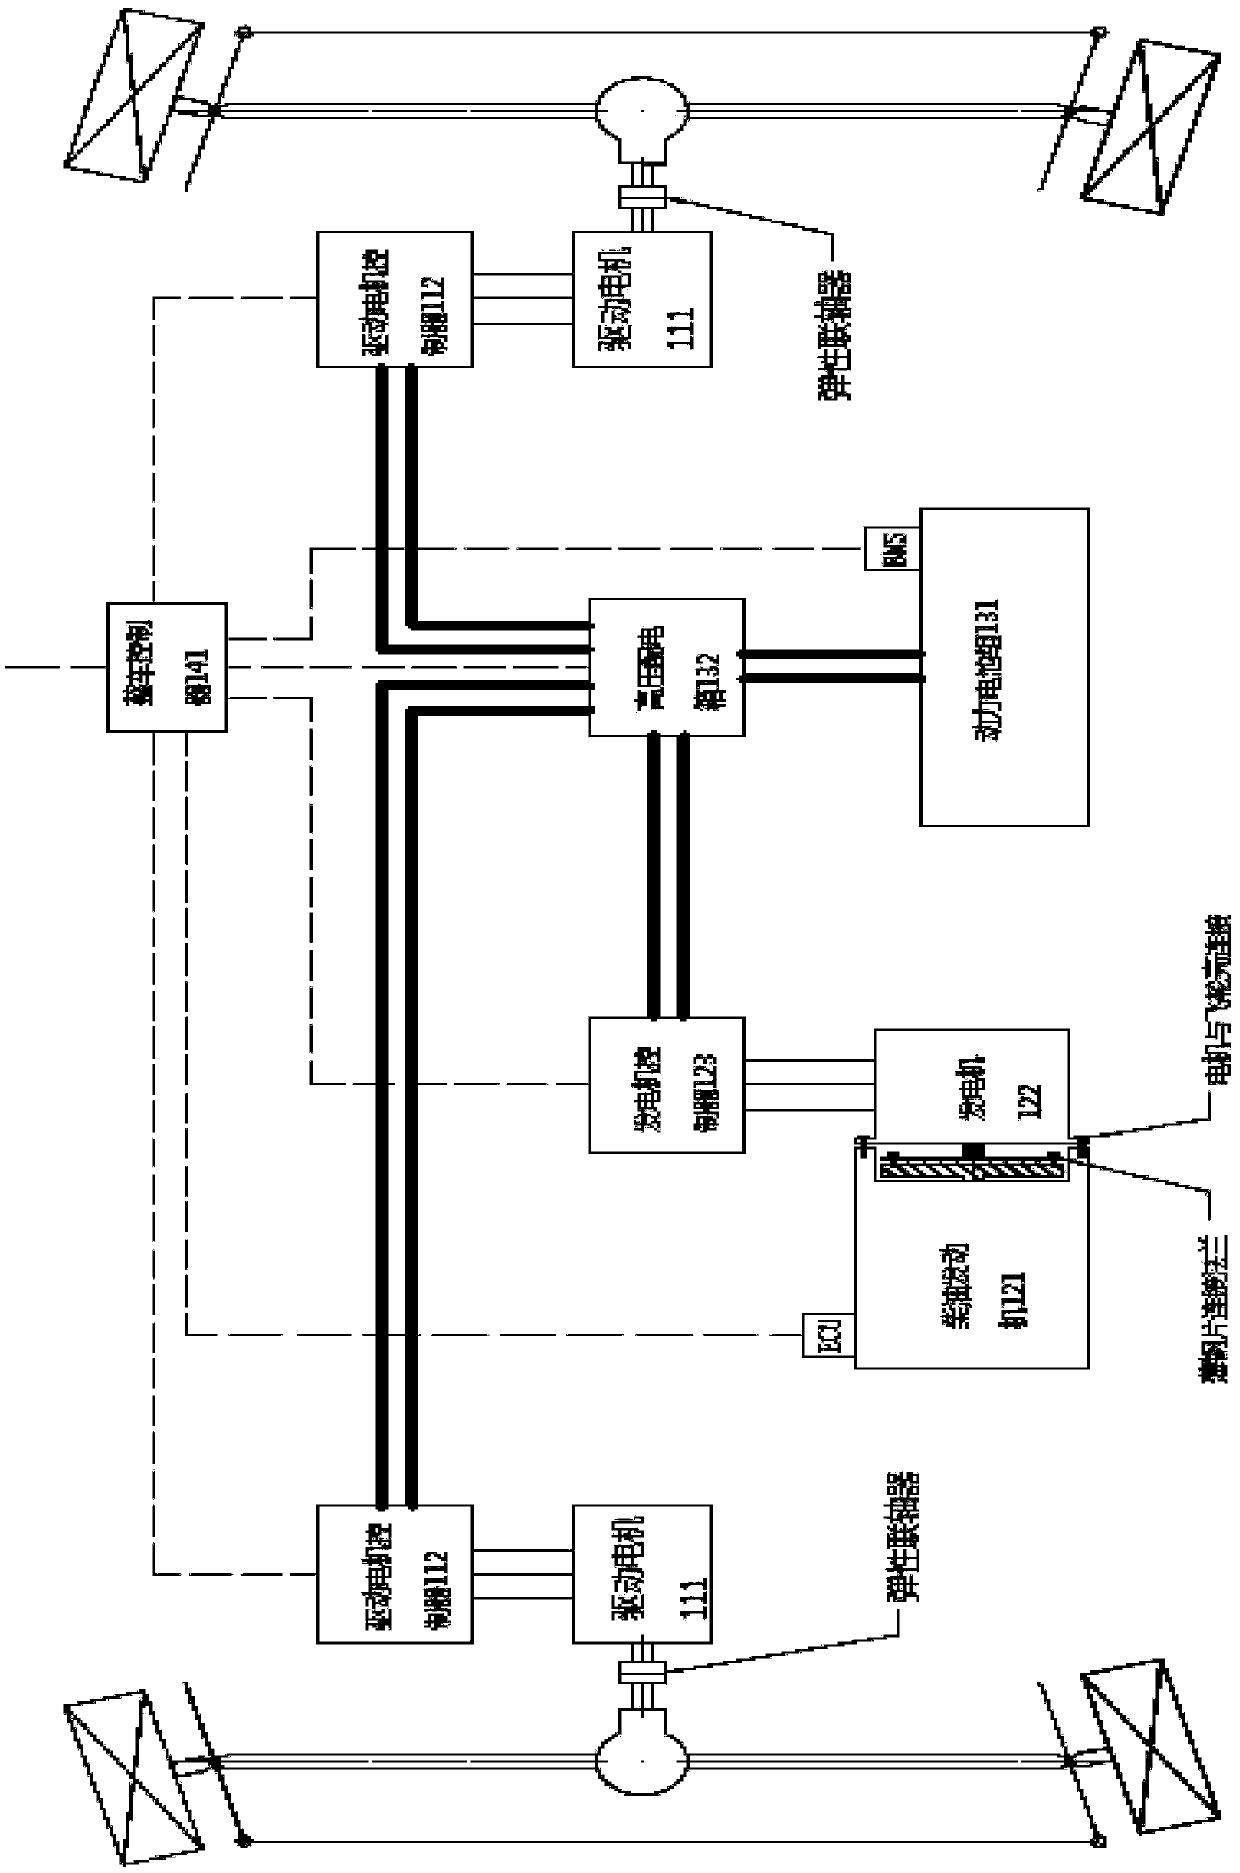 Hybrid power assembly control system special for automated guided vehicle